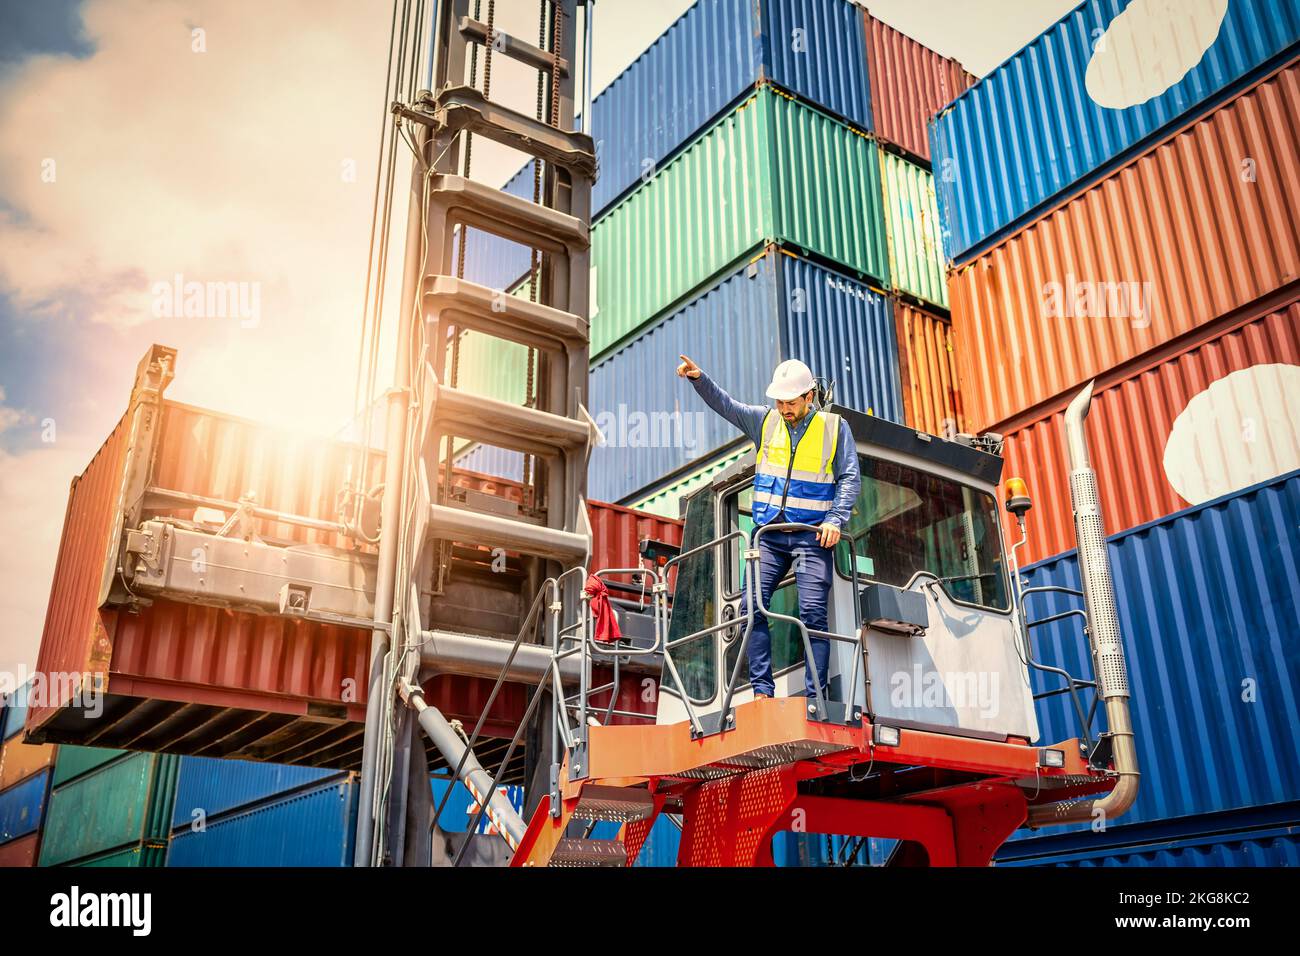 Handsome Engineer or foreman wears PPE checking container storage with cargo container background at sunset. Logistics global import or export shippin Stock Photo